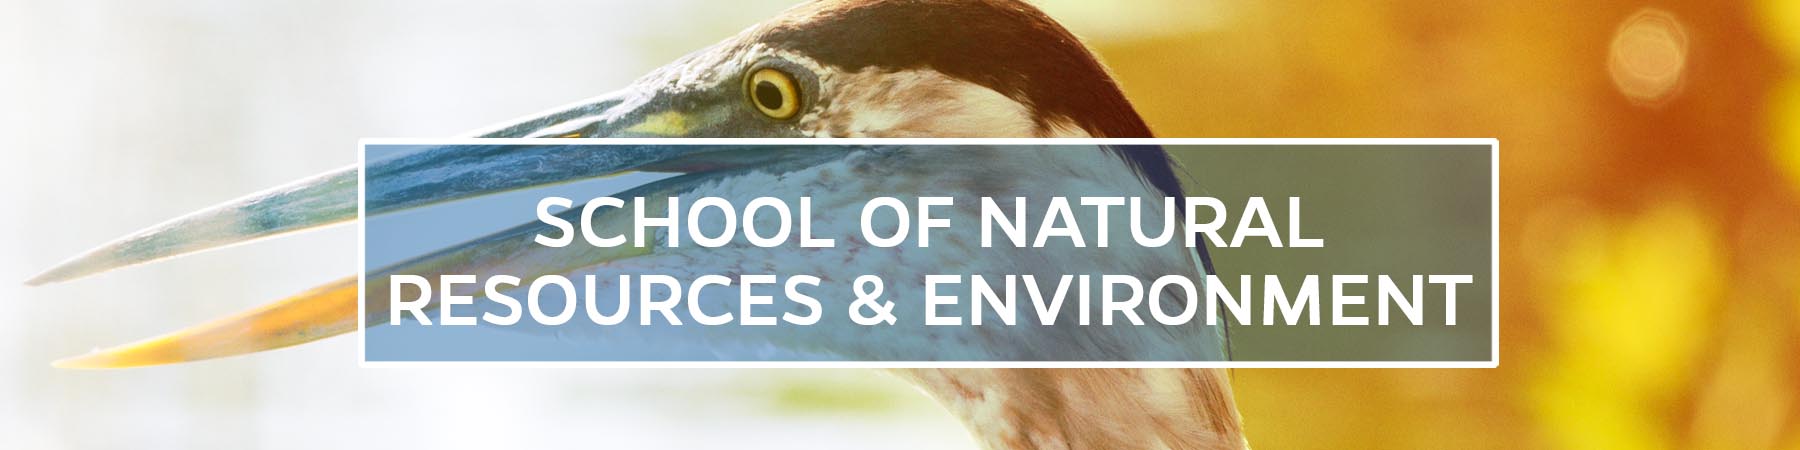 School of Natural Resources and Environment